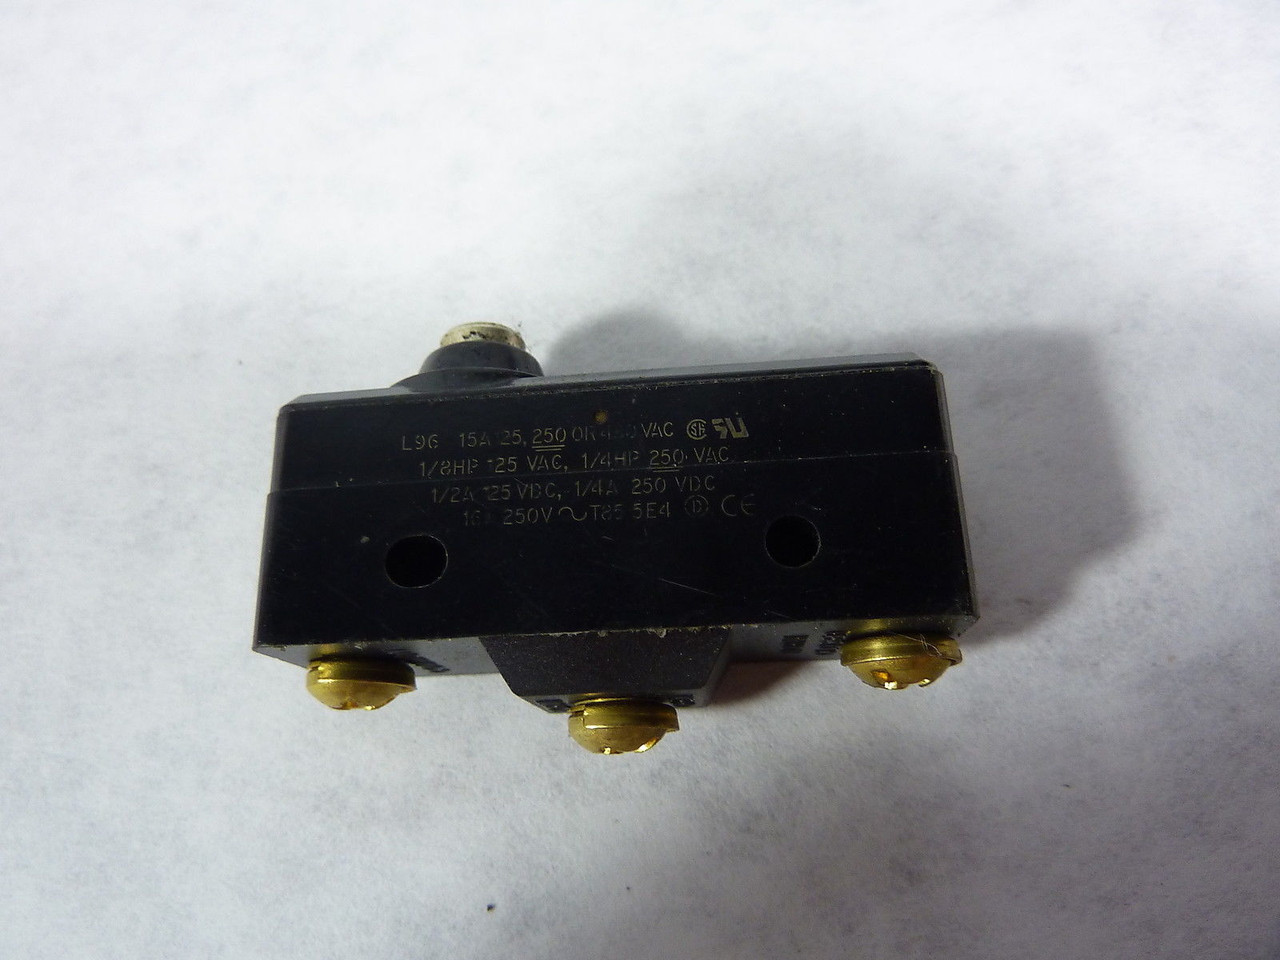 Microswitch BZ-2RD-A2 Snap Action Basic Micro Switch USED